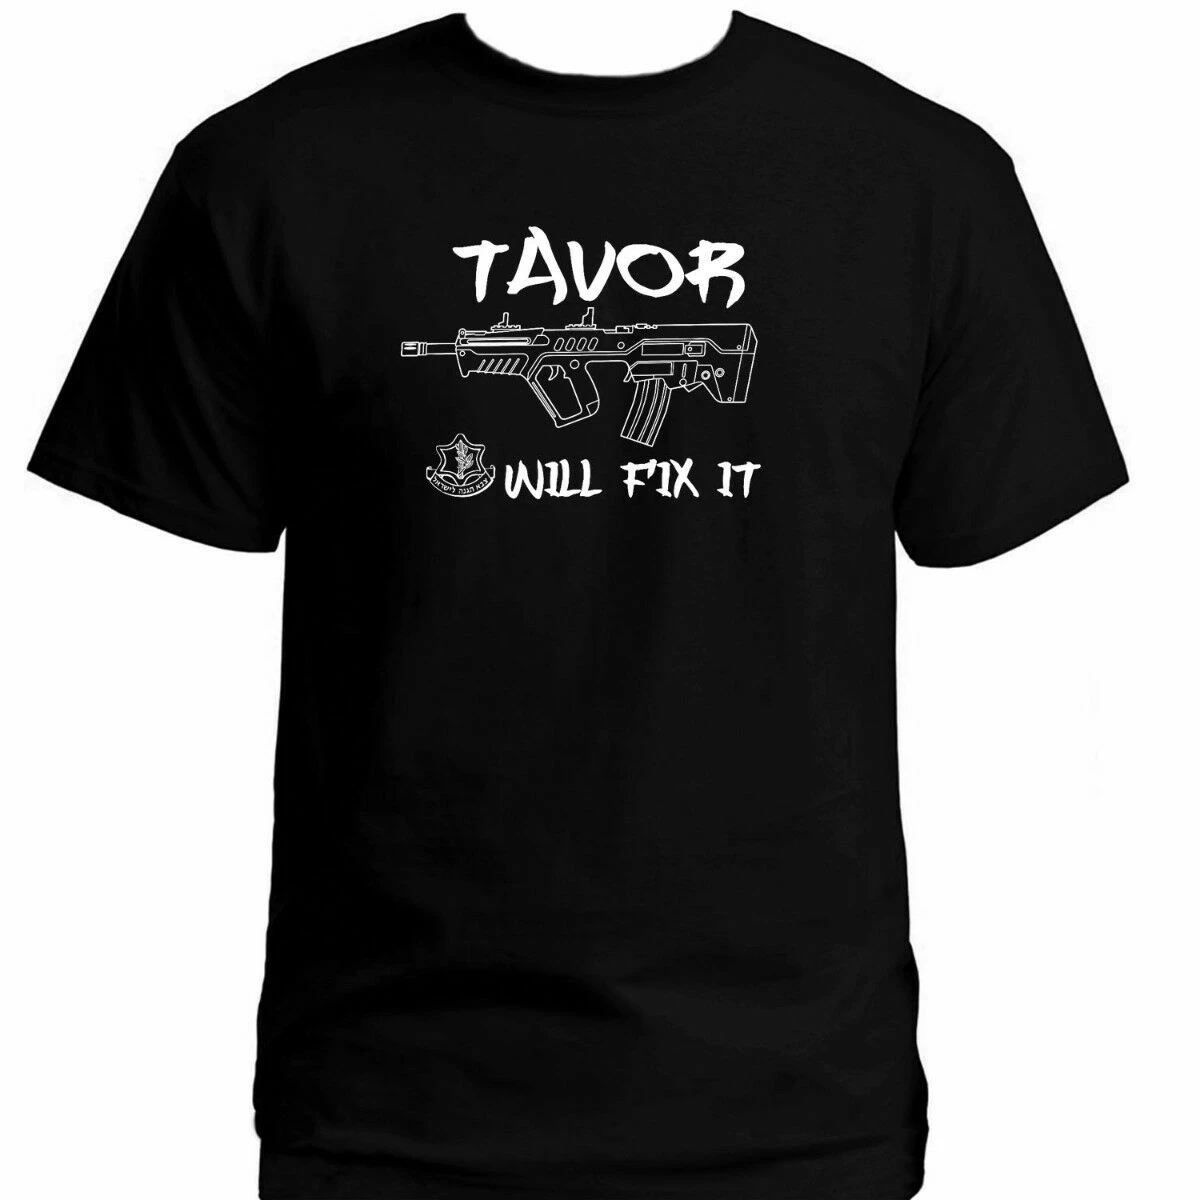 

Jewish Army Israel Defense Forces Tavor Assault Rifle T Shirt New 100% Cotton Short Sleeve O-Neck T-shirt Casual Mens Top